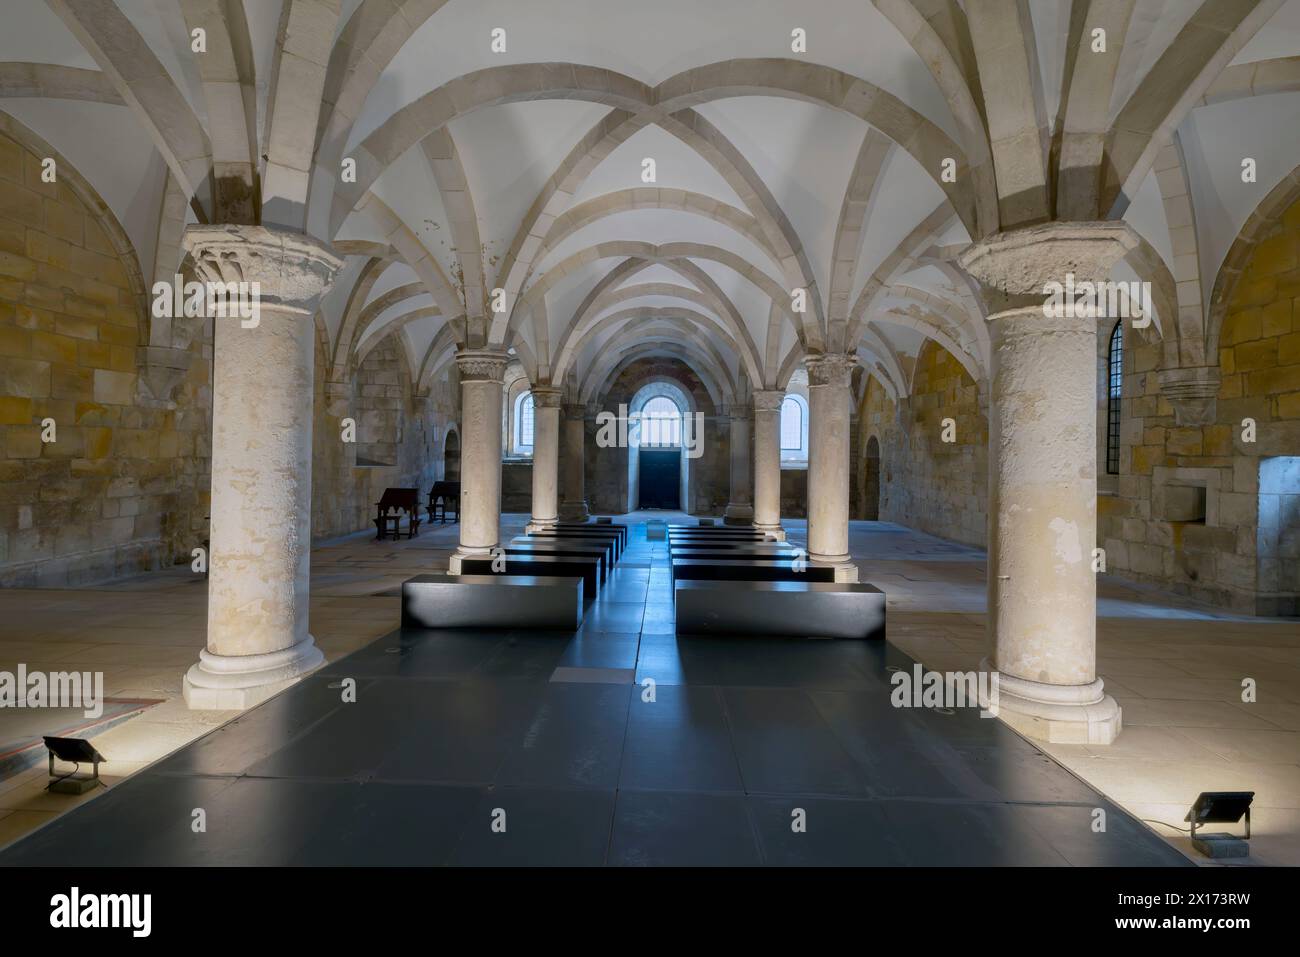 Inside the monk's hall. The Alcobaça Monastery (Mosteiro de Alcobaça)  or Alcobasa Monastery  is a Catholic monastic complex located in the town of Al Stock Photo